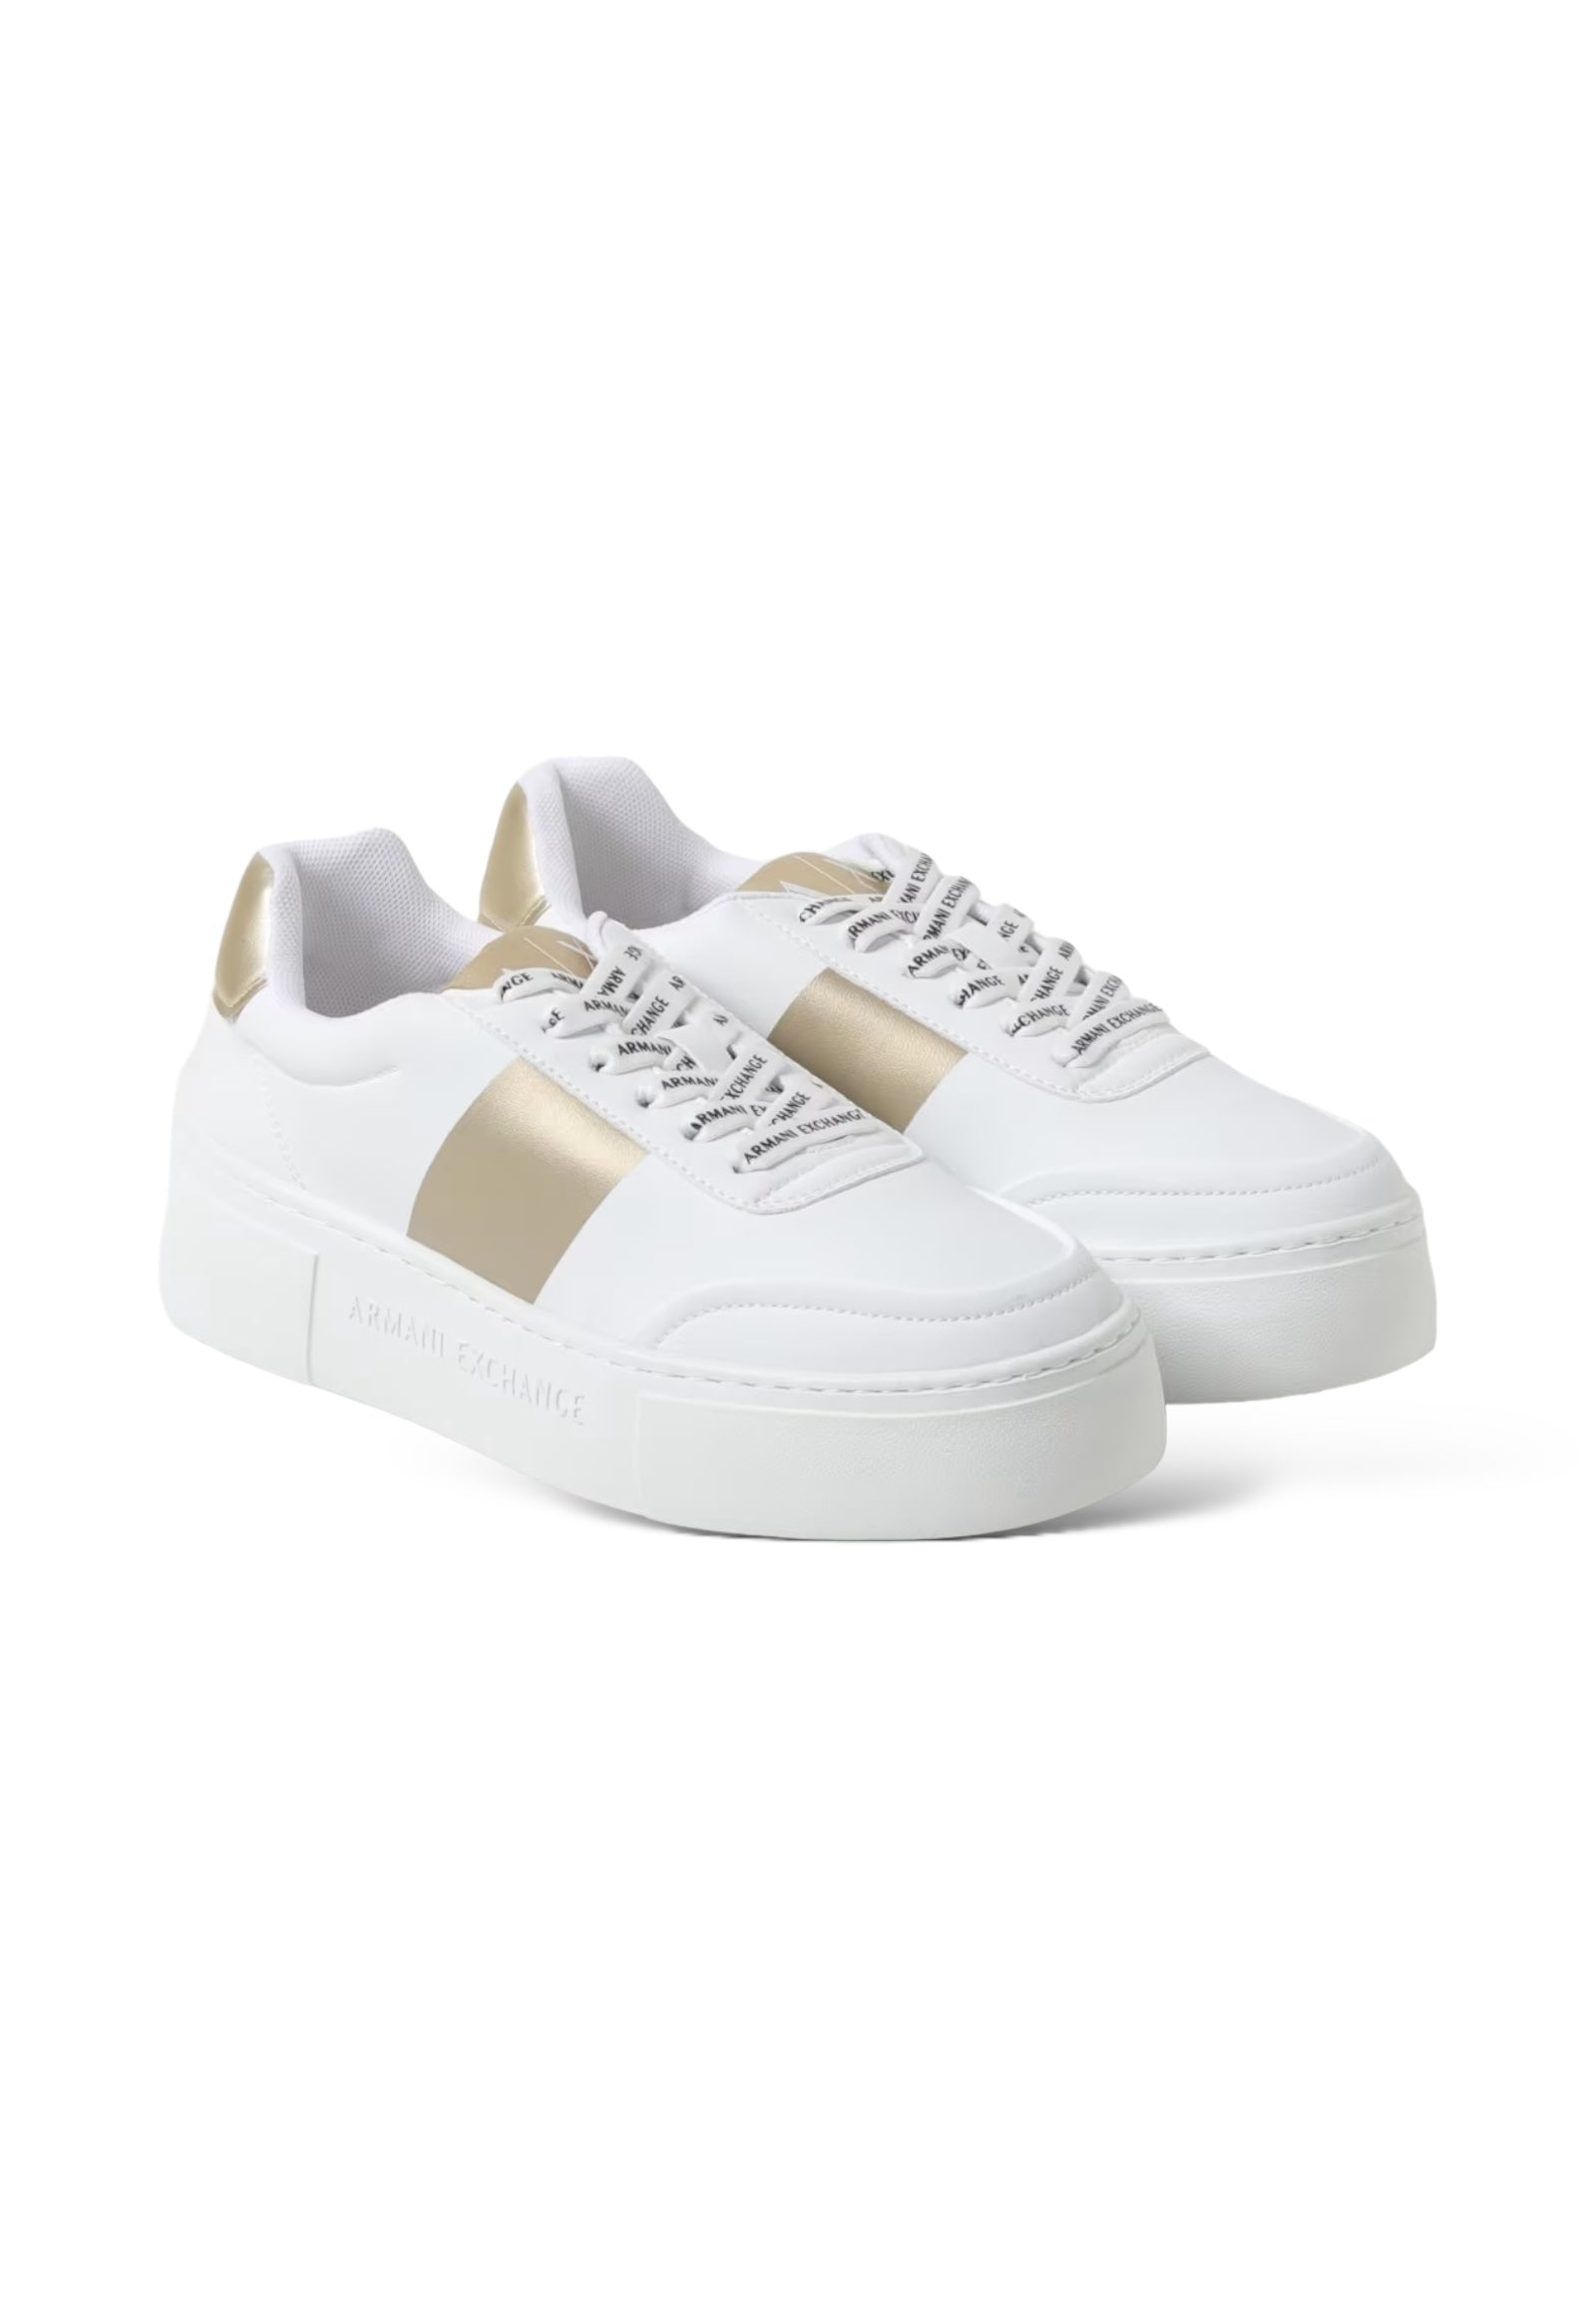 Sneakers Xdx134 Optic WhitE-Pale Gold